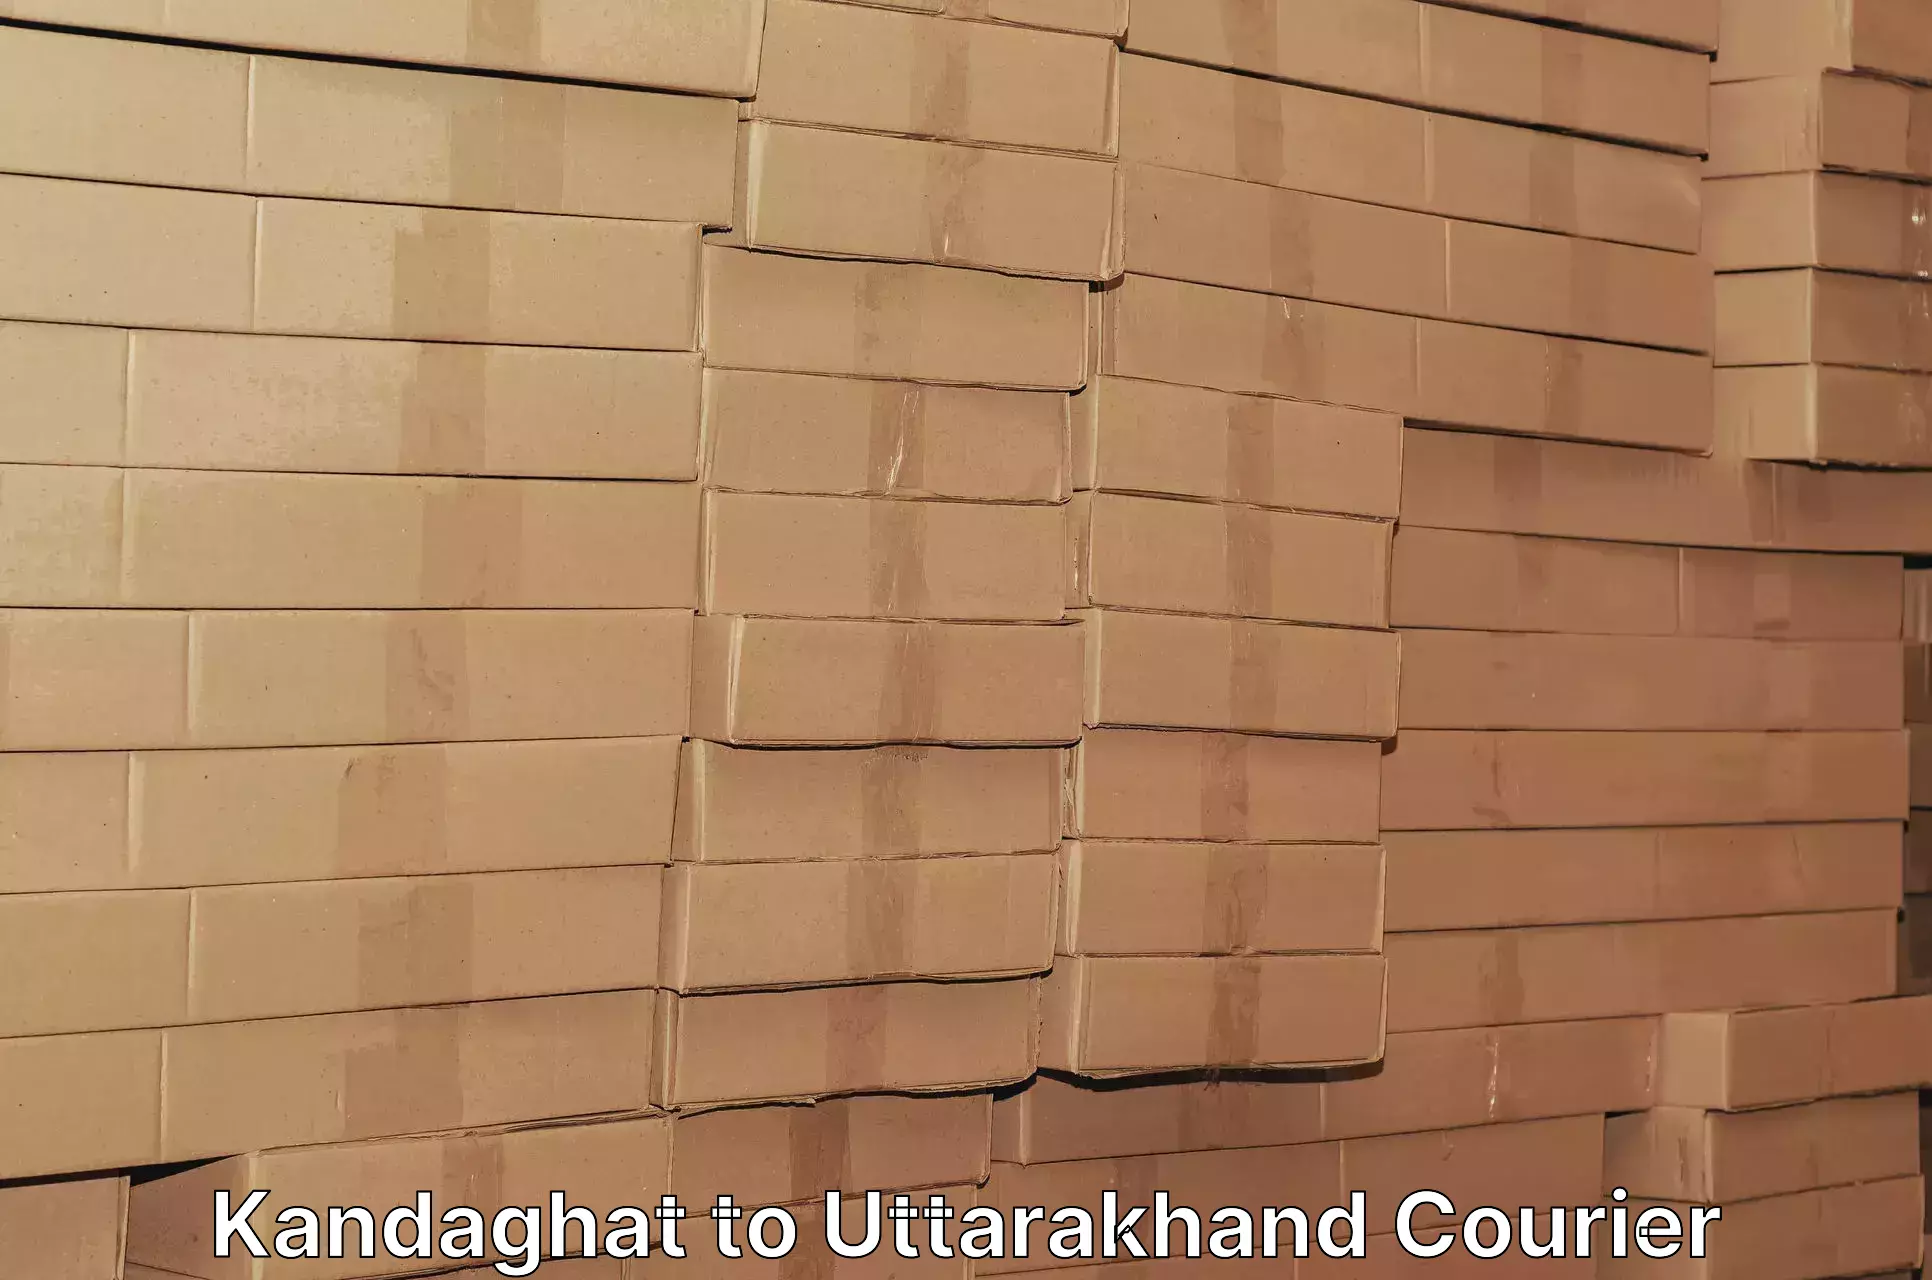 Sustainable delivery practices Kandaghat to Uttarakhand